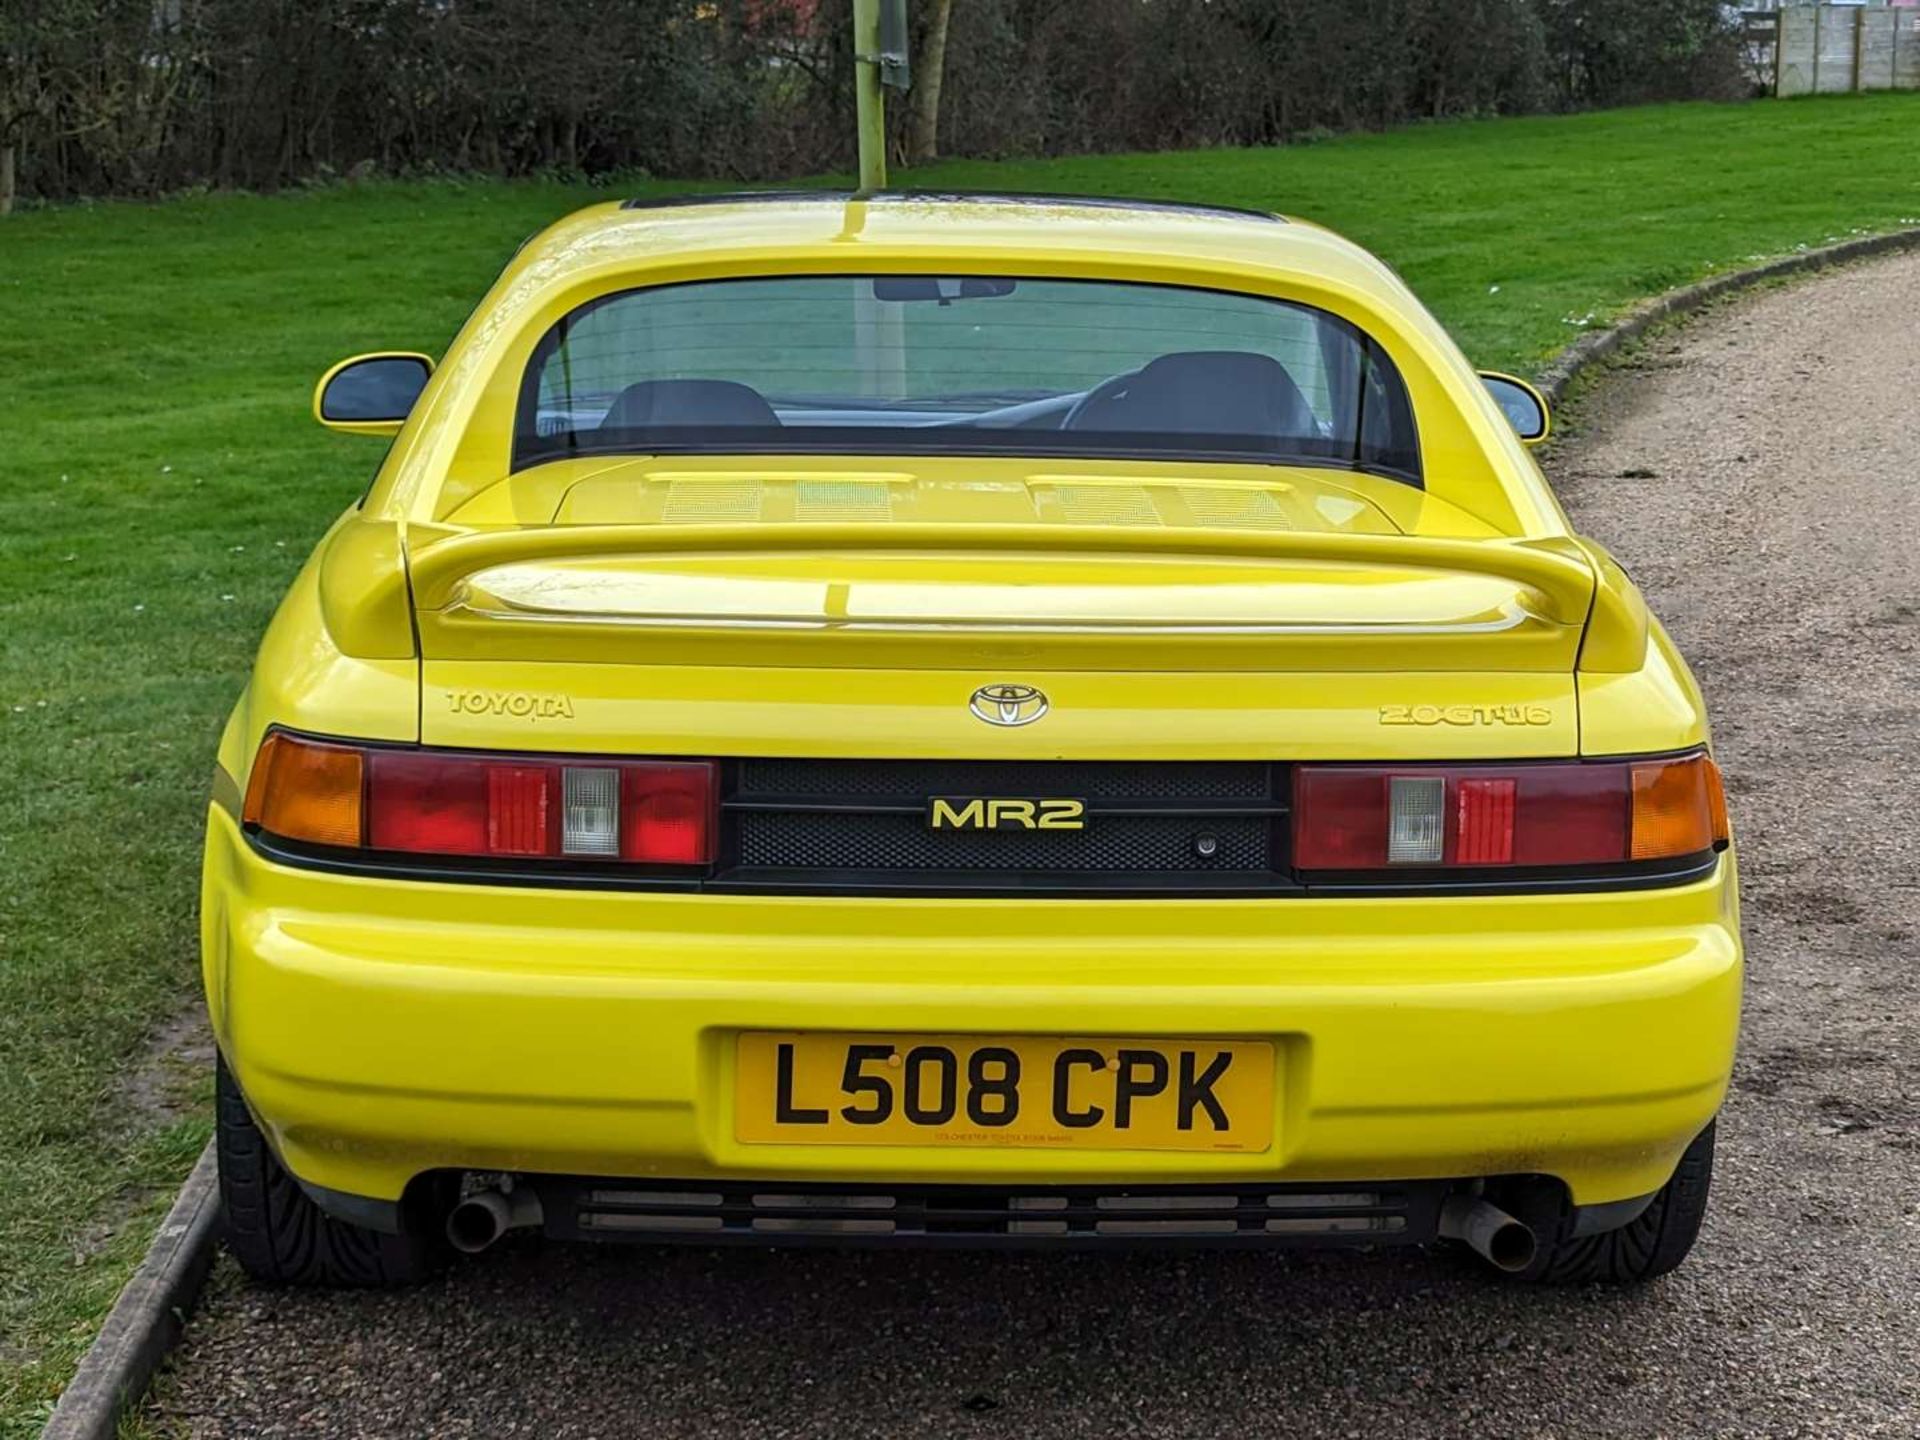 1993 TOYOTA MR2 GT - Image 6 of 29